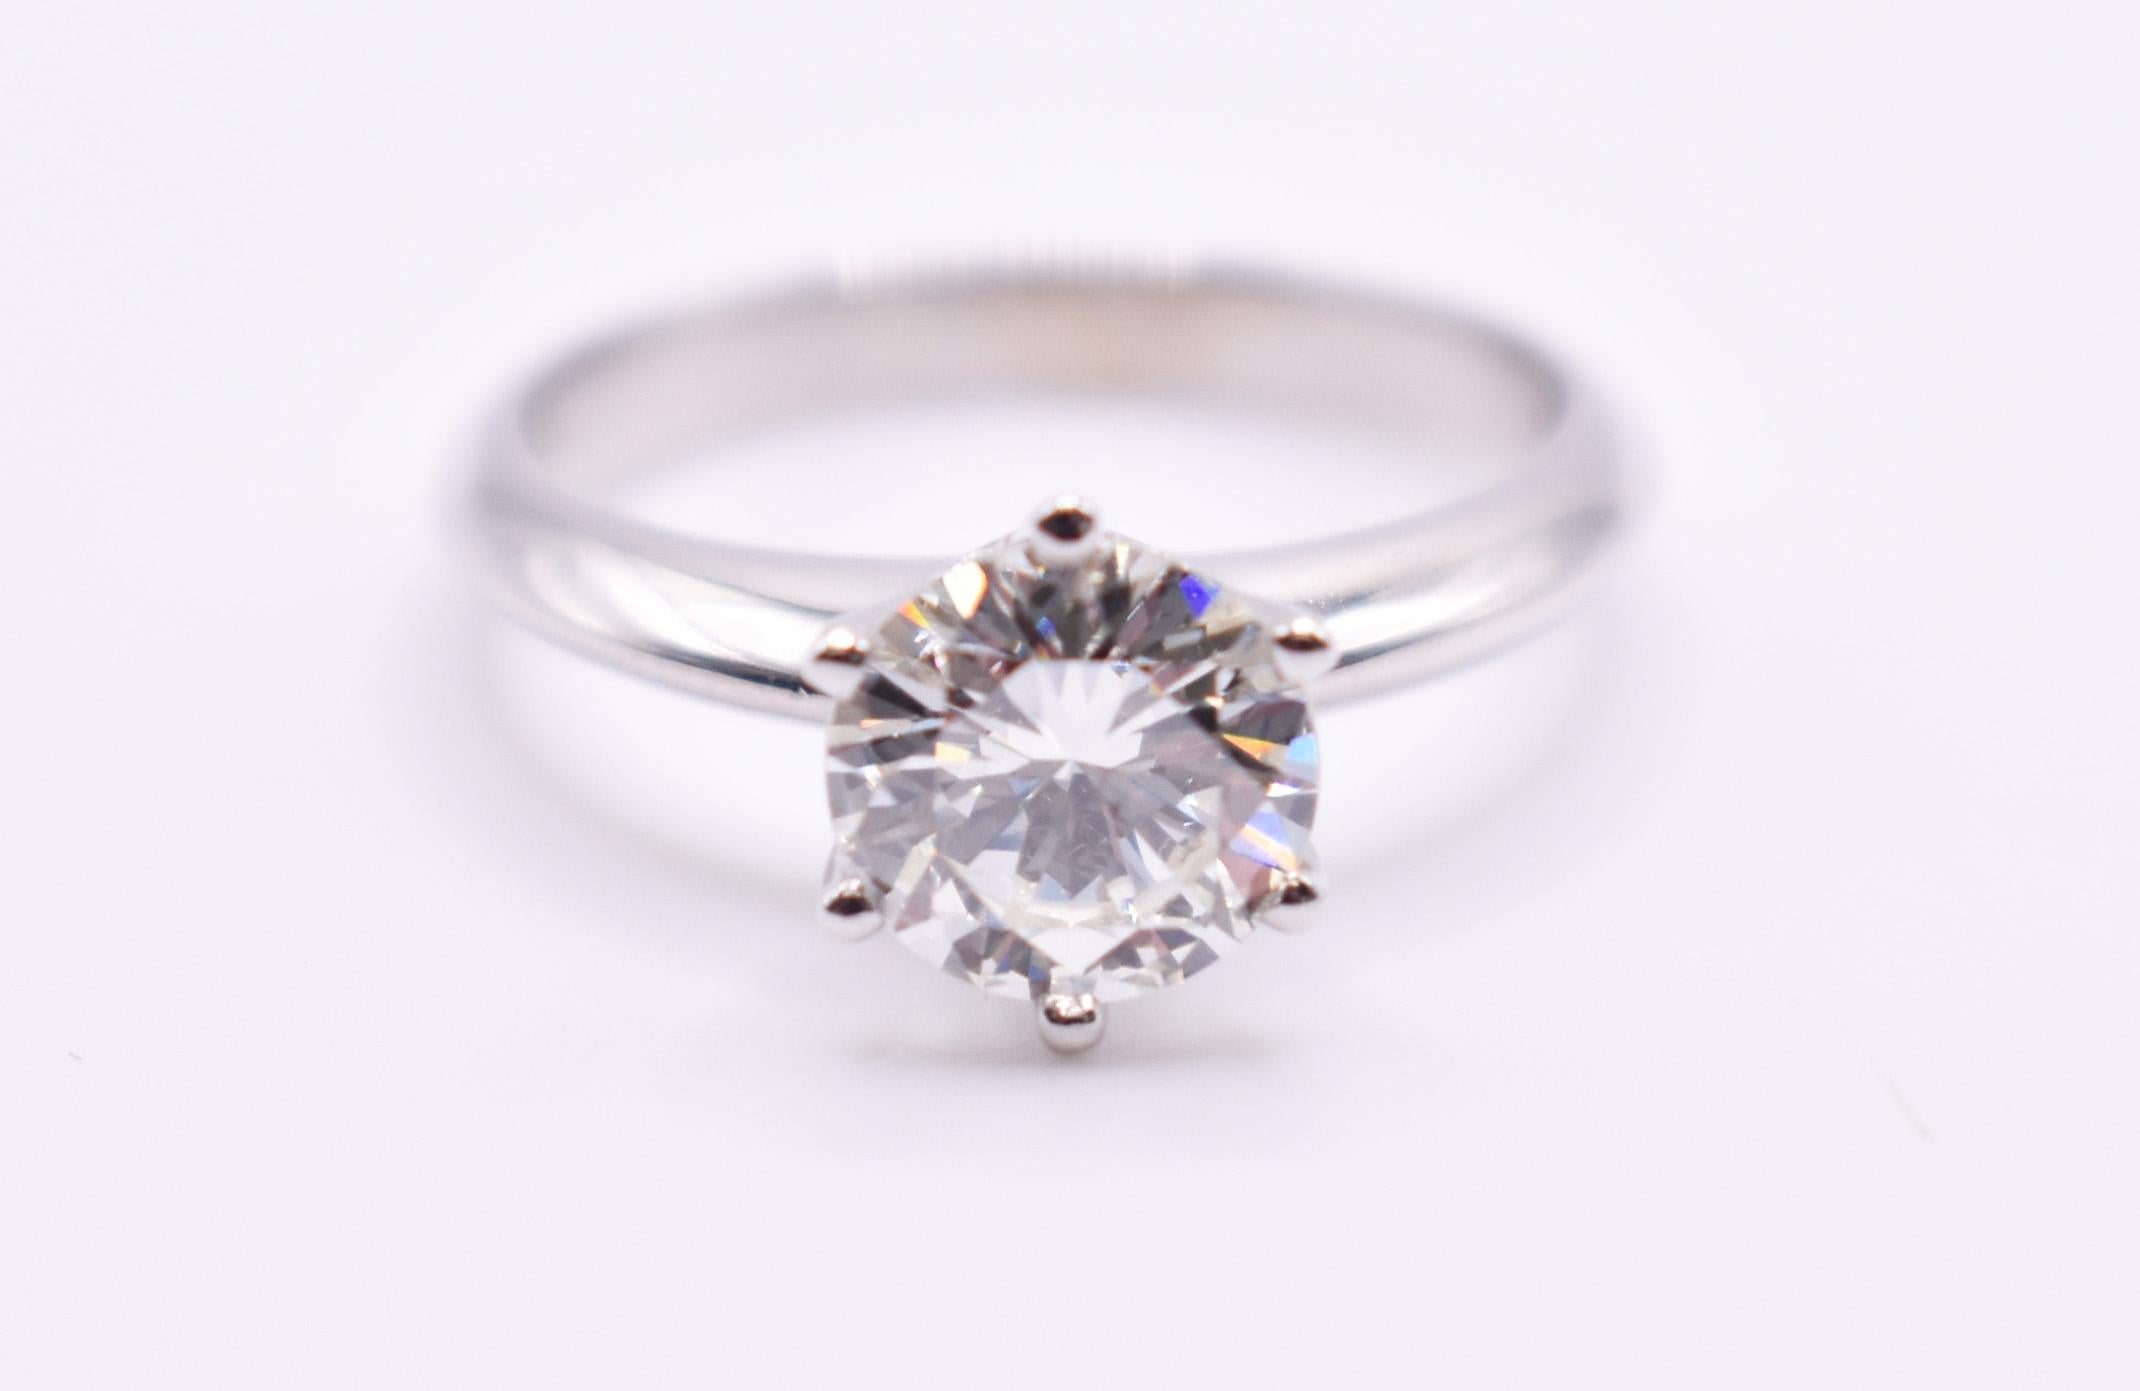 On offer for sale is a splendid 1.46ct 18K white gold Tiffany style diamond engagement ring. 

Metal: 18K White Gold
Total Carat Weight: 1.46
Colour: I
Clarity: VS2
Size: US= 6 1/2 UK= N